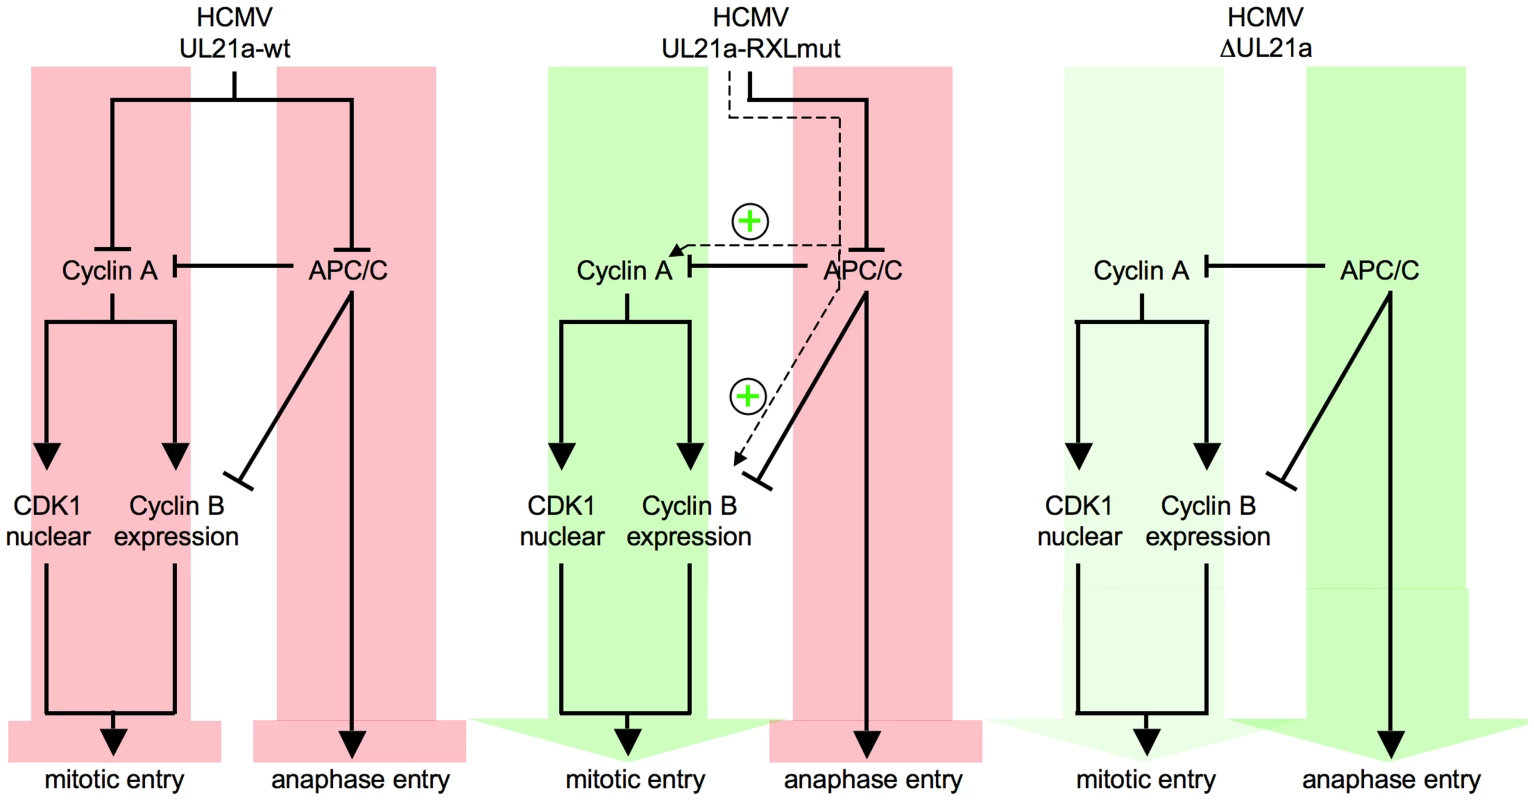 Crosstalk and antagonism between Cyclin A2 and APC/C-inhibitory functions of HCMV-pUL21a.